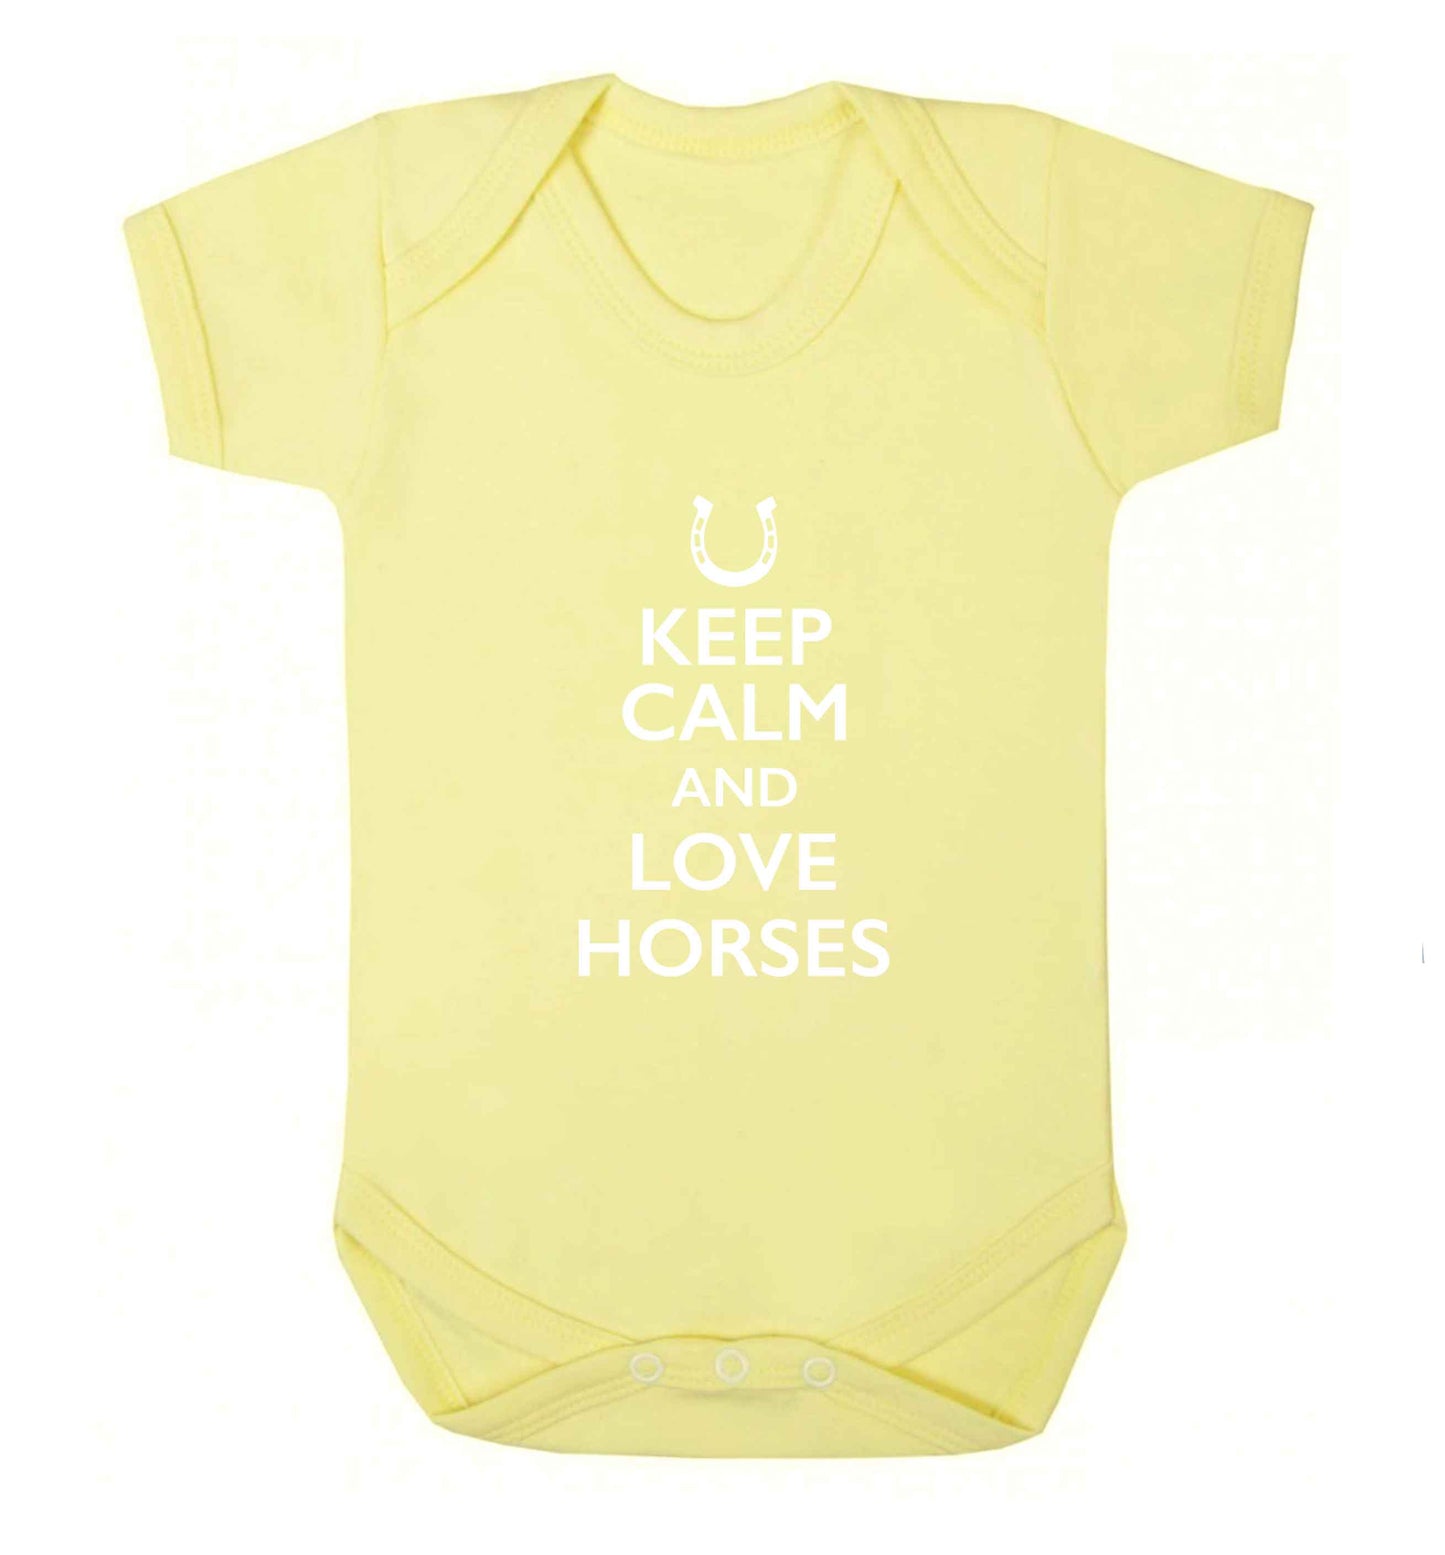 Keep calm and love horses baby vest pale yellow 18-24 months